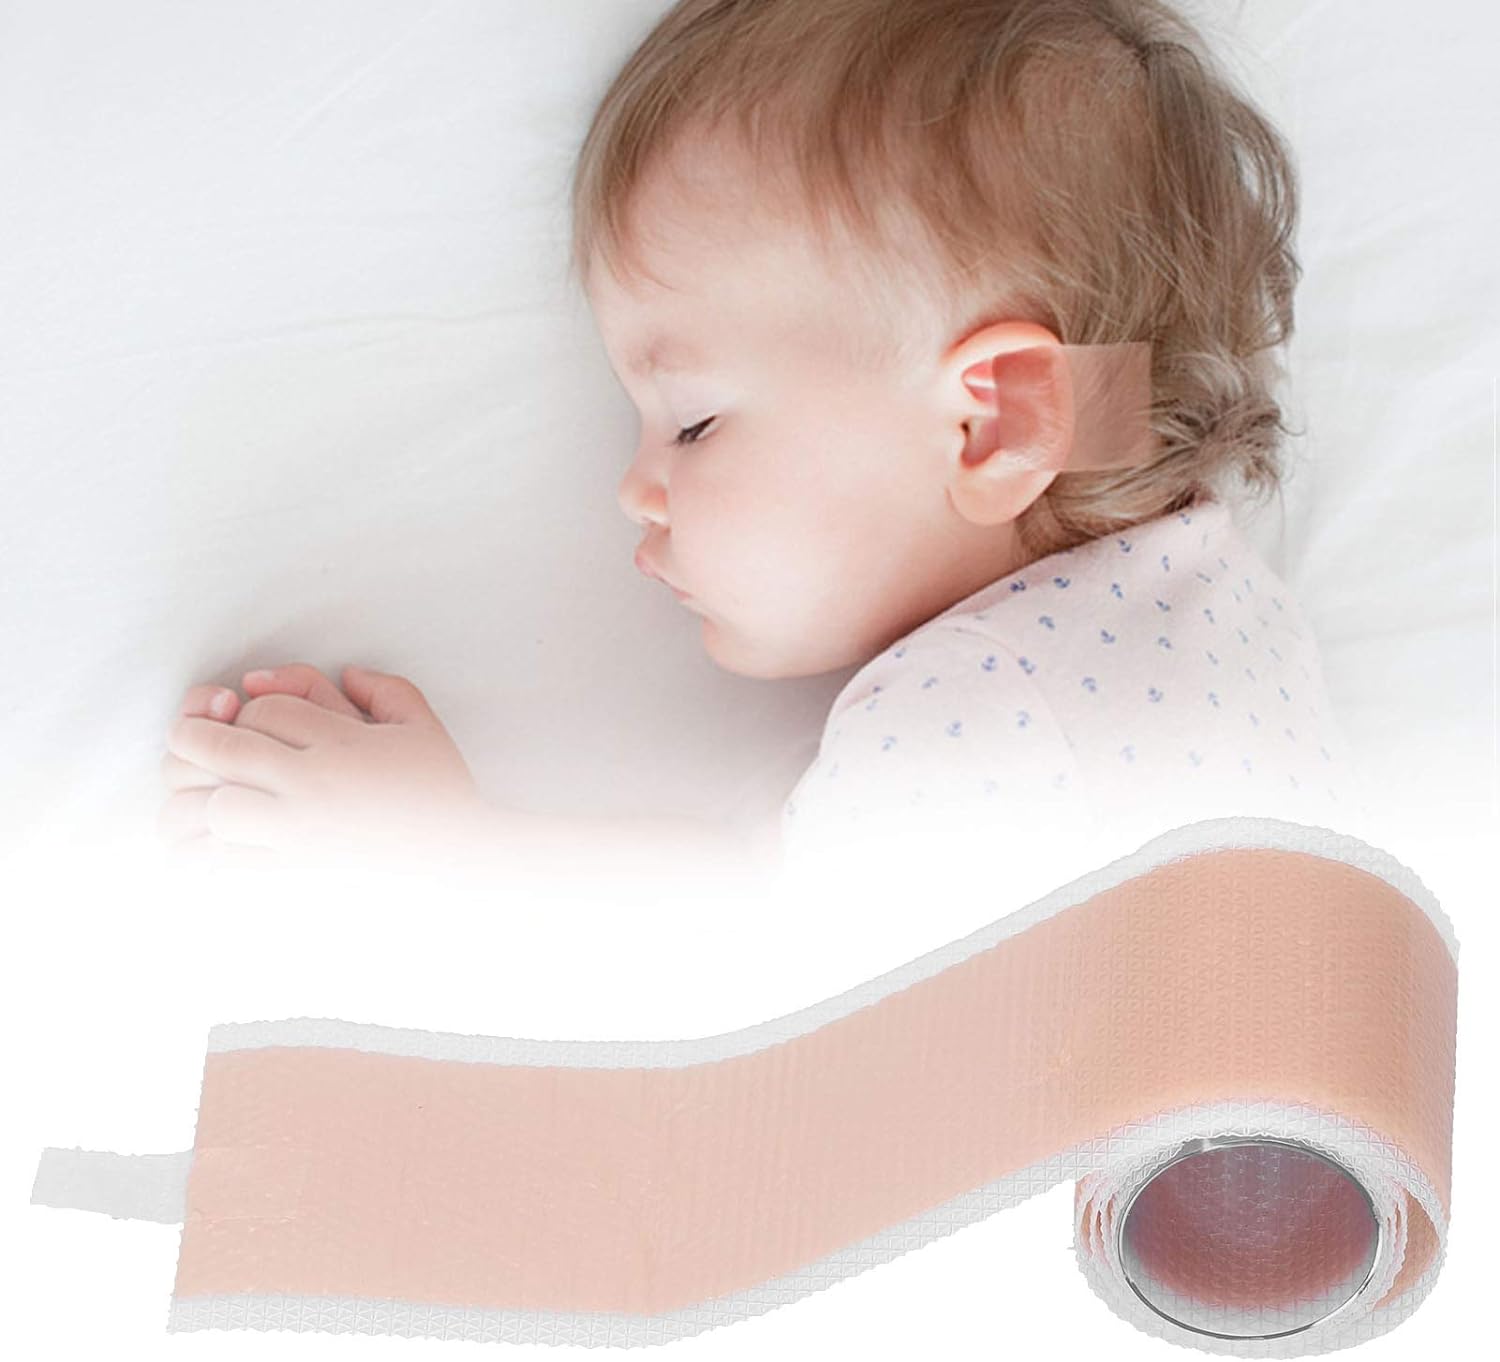 4 x 50cm Silicone Newborn Baby Ear Aesthetic Correctors, Kids Infant Protruding Ear Patch Stickers